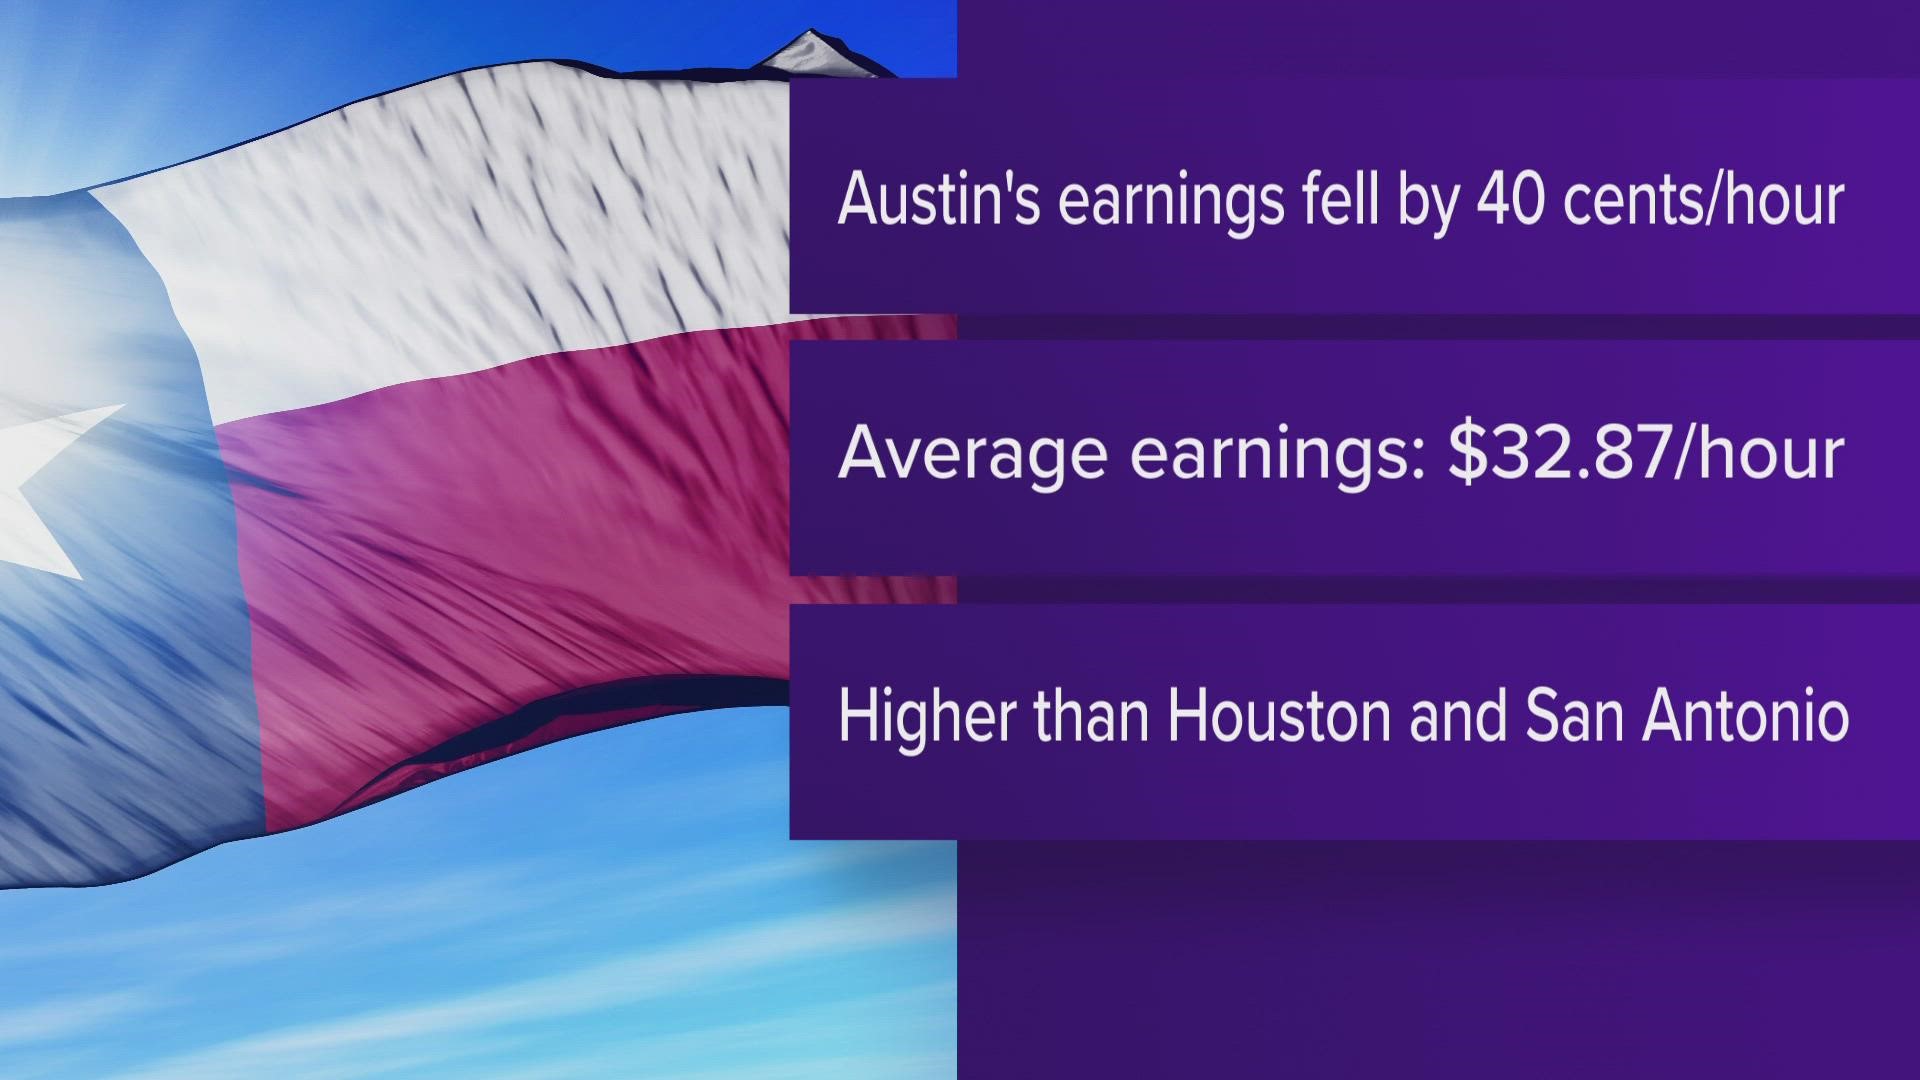 A Dec. 15 report shows Austin was the only major Texas city with a decrease in earnings for October. It was $32.87 an hour.